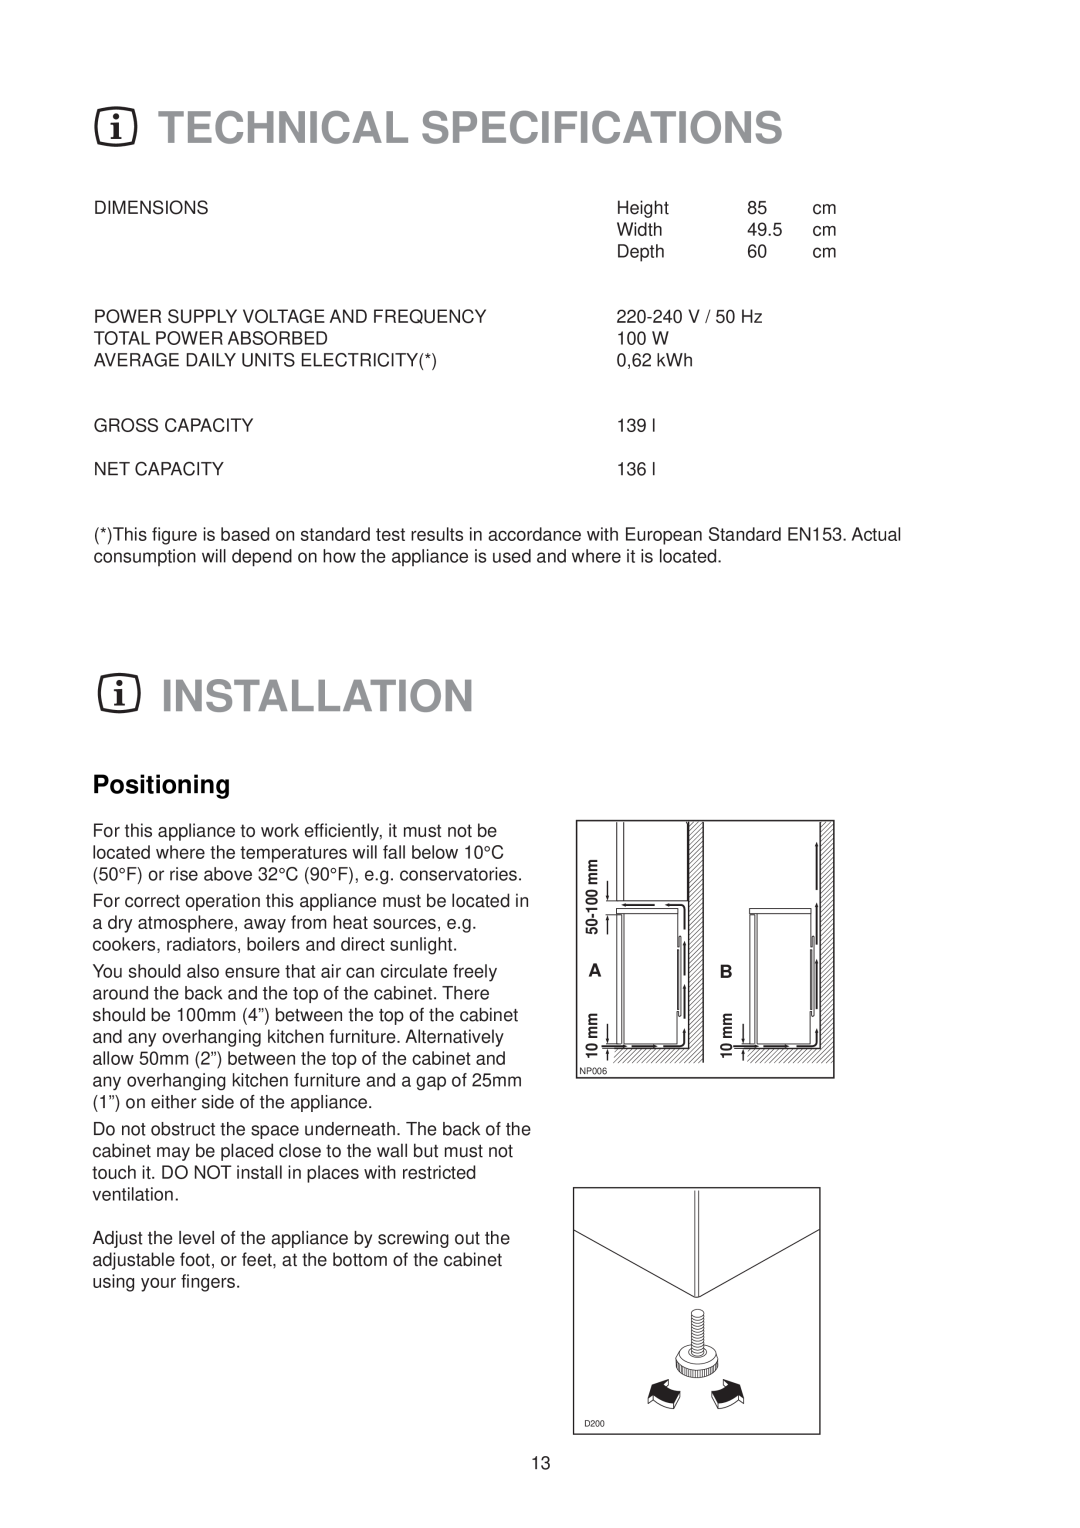 Zanussi ZT 52 RL manual Technical Specifications, Installation, Positioning 